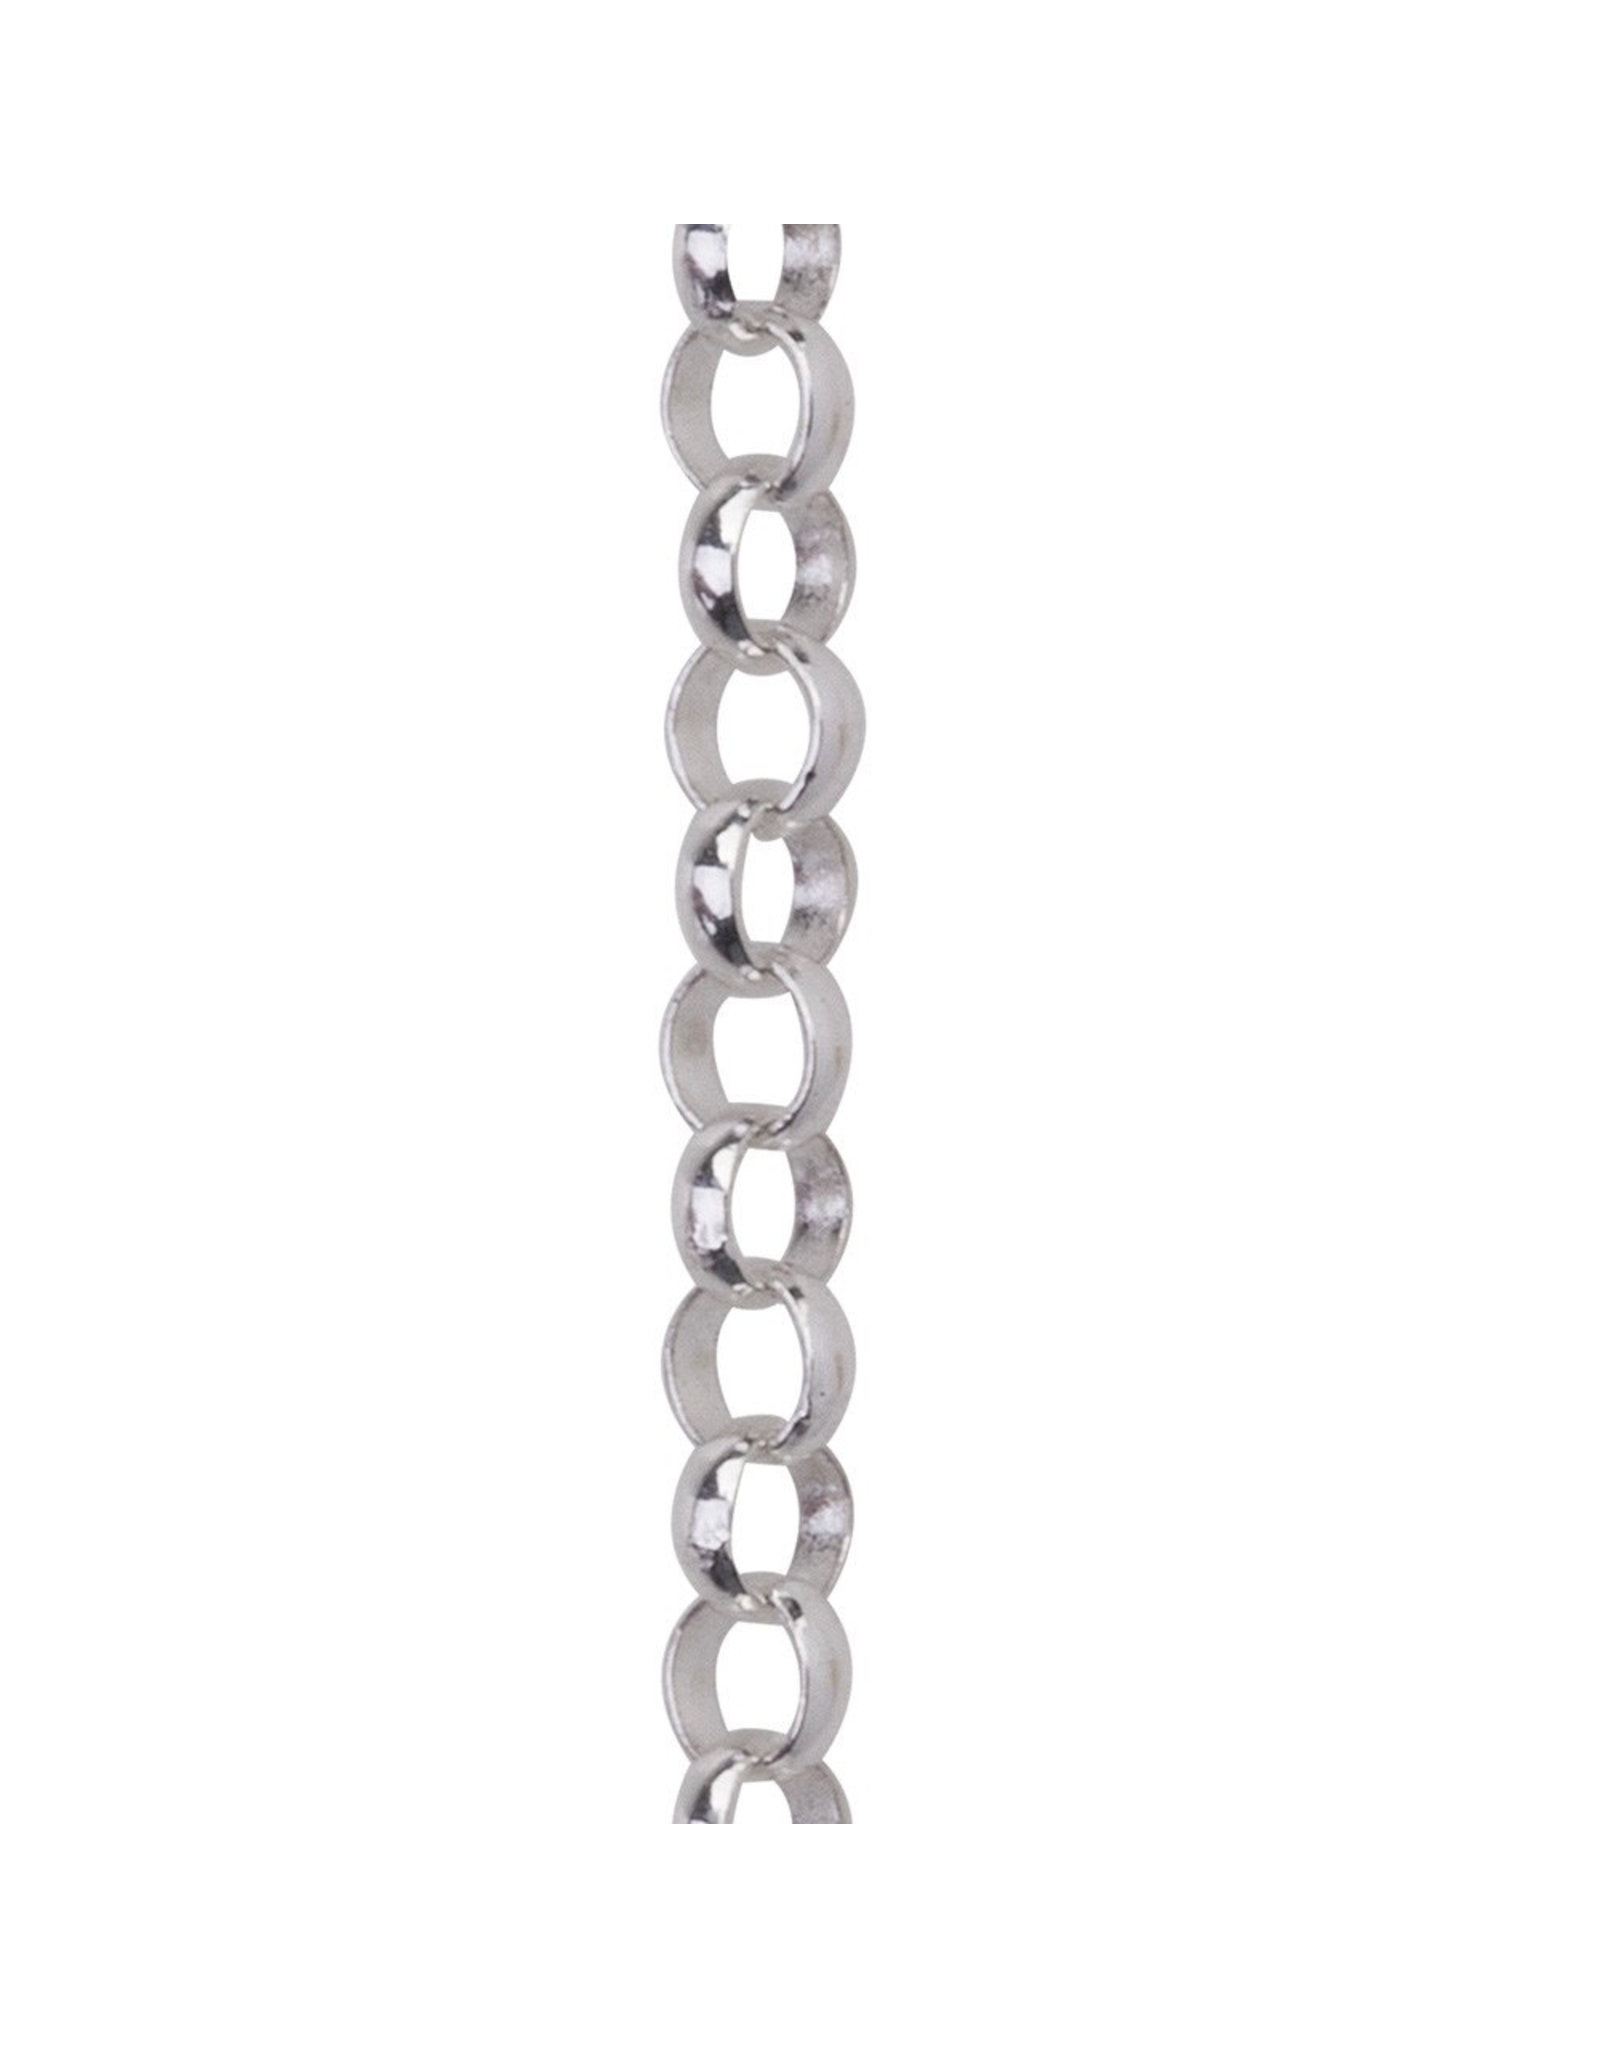 Waxing Poetic® Jewelry Rolo Chain 18 inch-Sterling SIlver